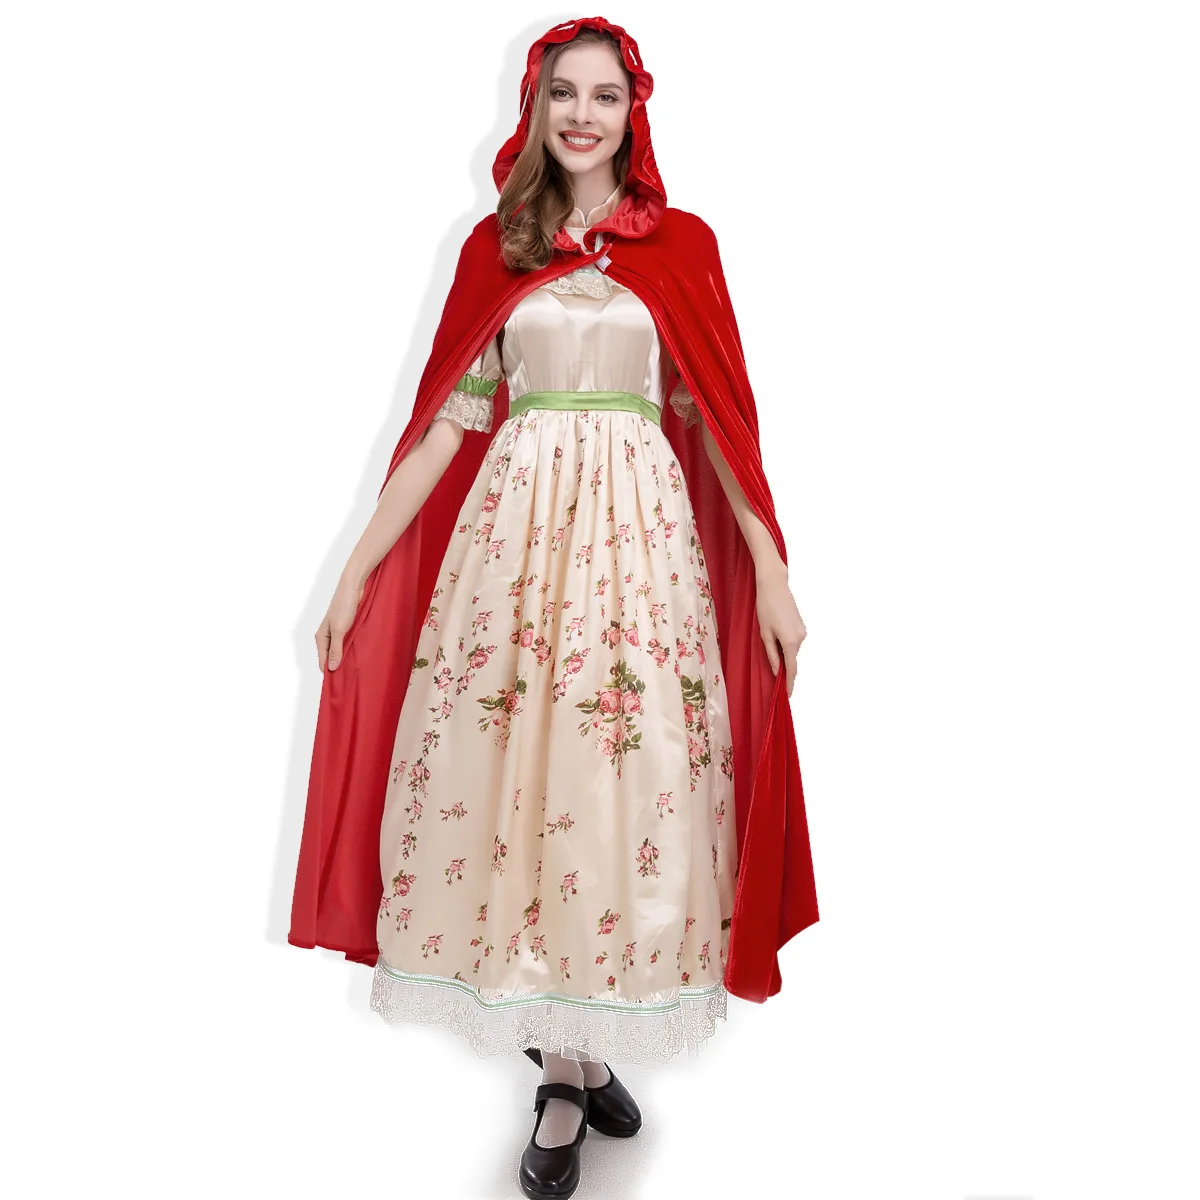 

HHalloween Costume Cosplay Long Hooded Cloak Witch Medieval Red Shawl Little Red Hood Riding Hooded Servant Girl Costume